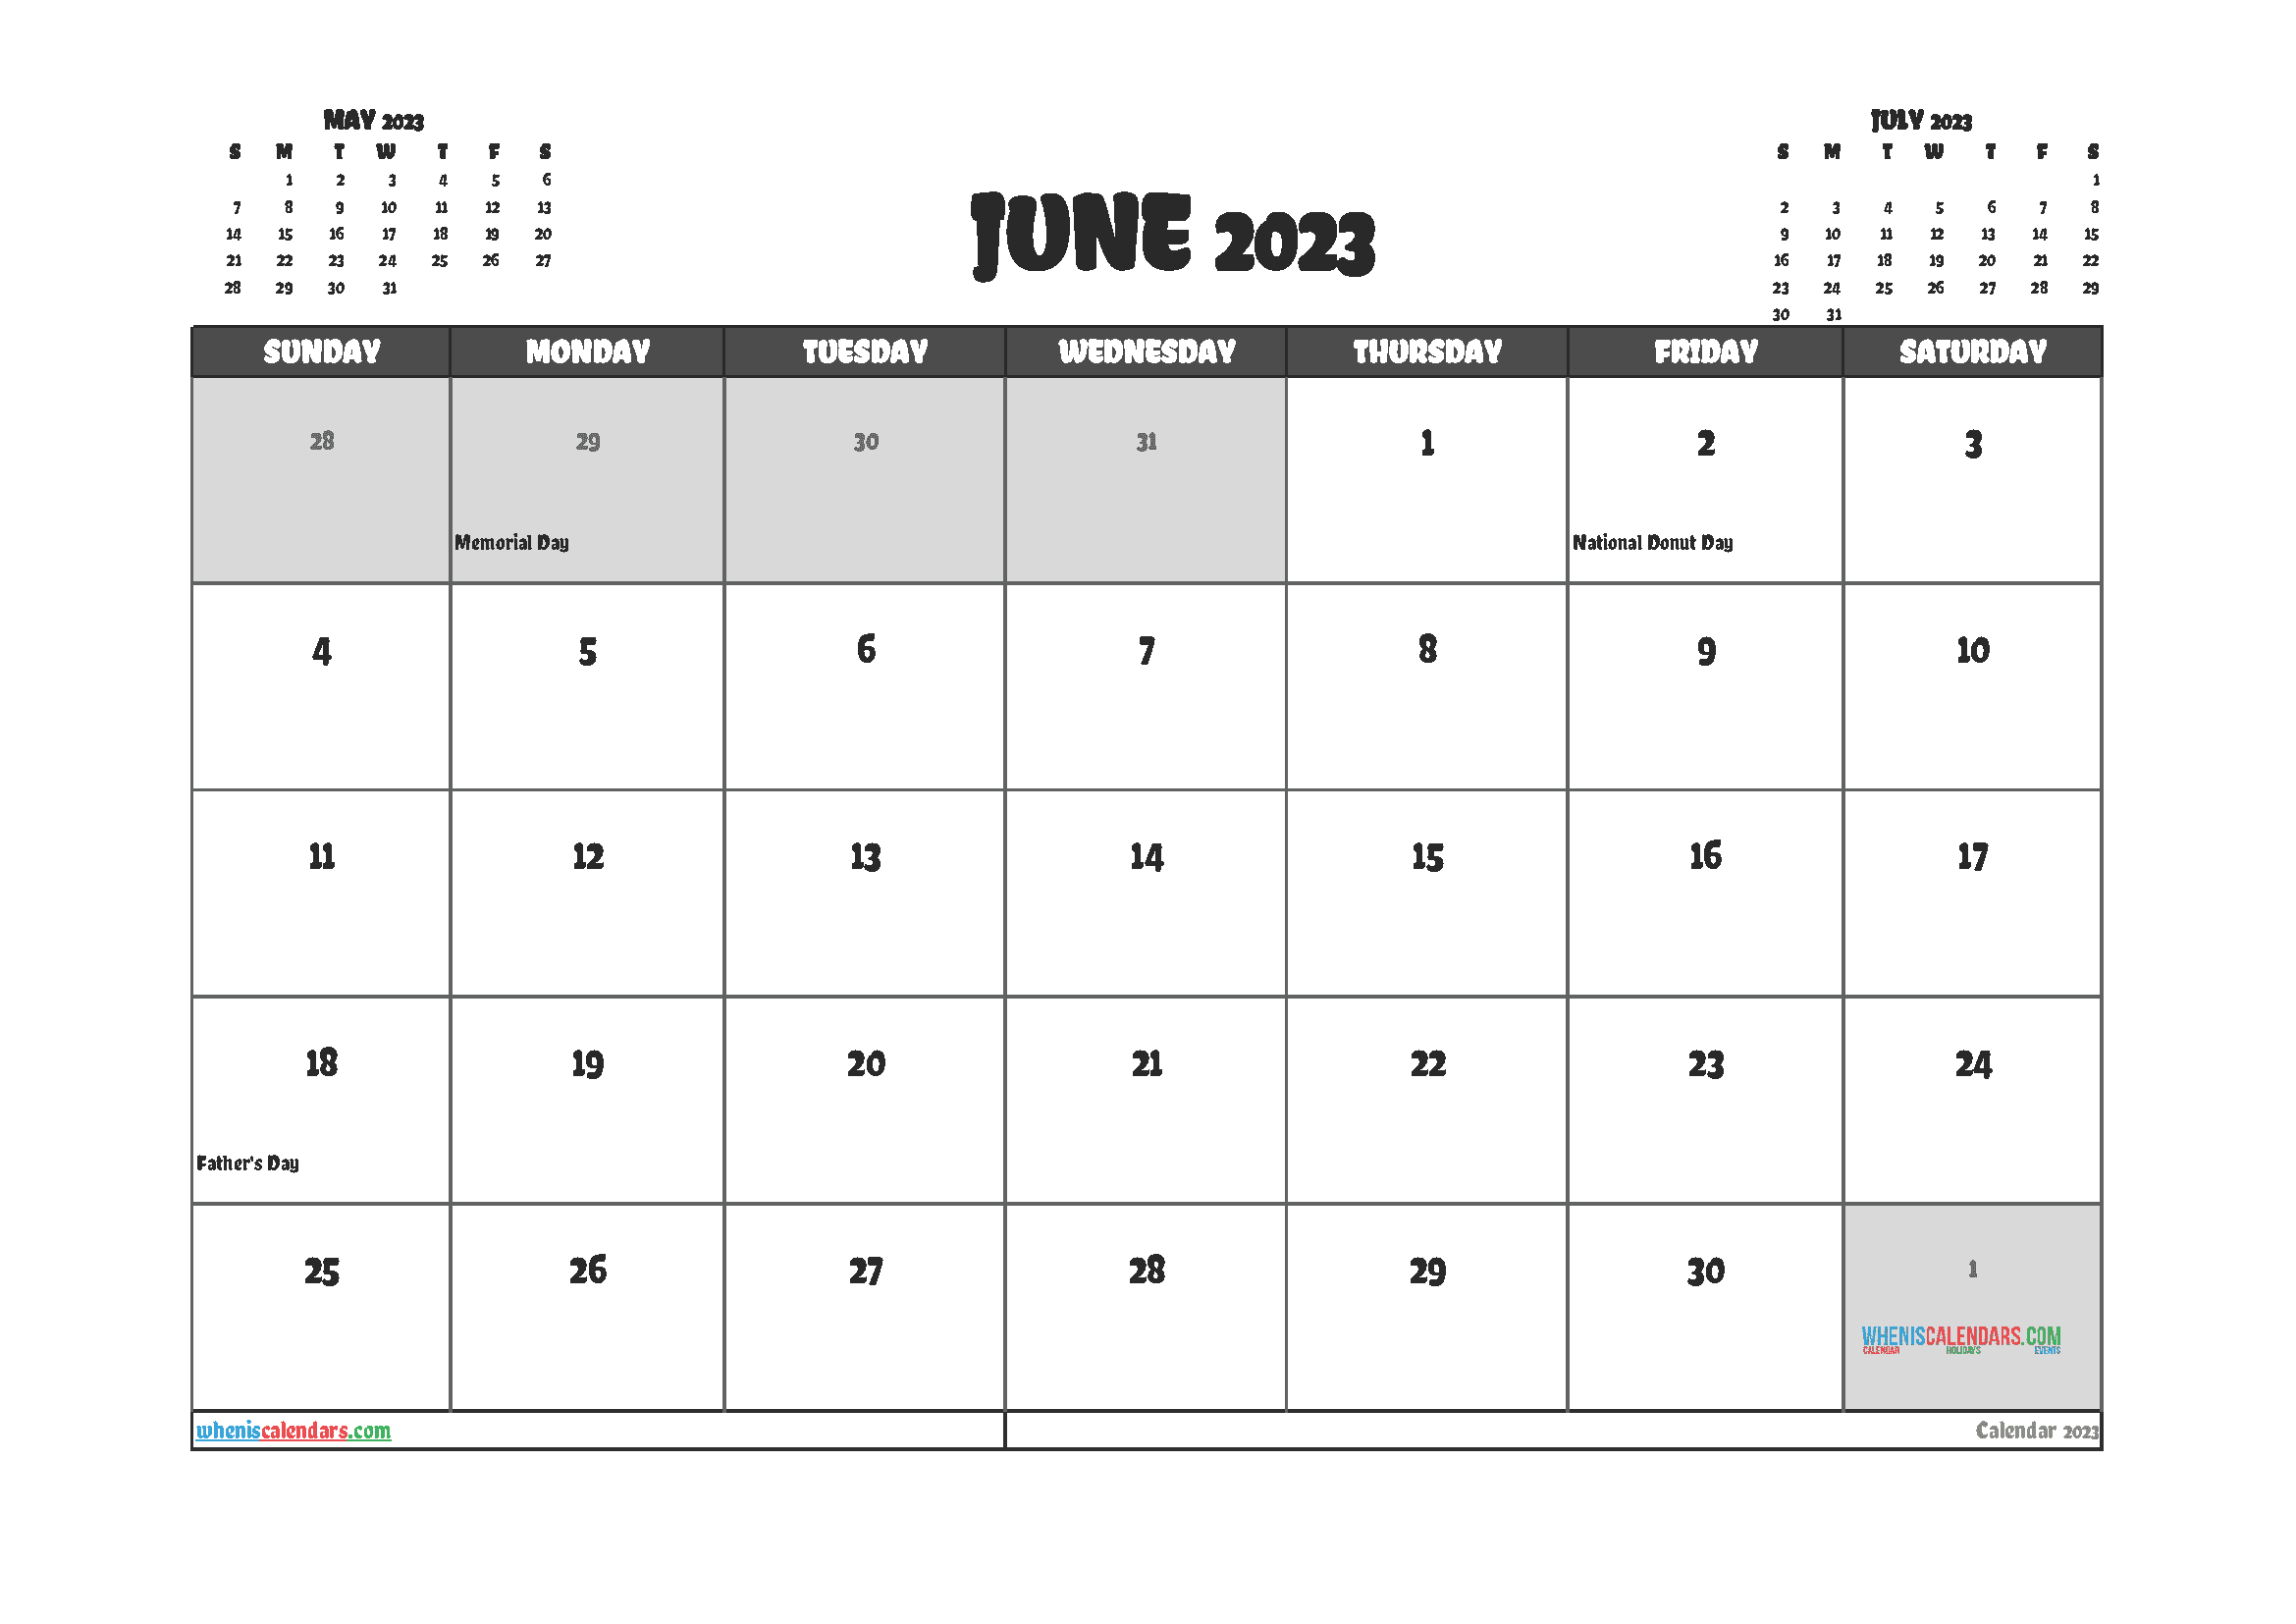 Free Calendar 2023 June with Holidays PDF in Landscape